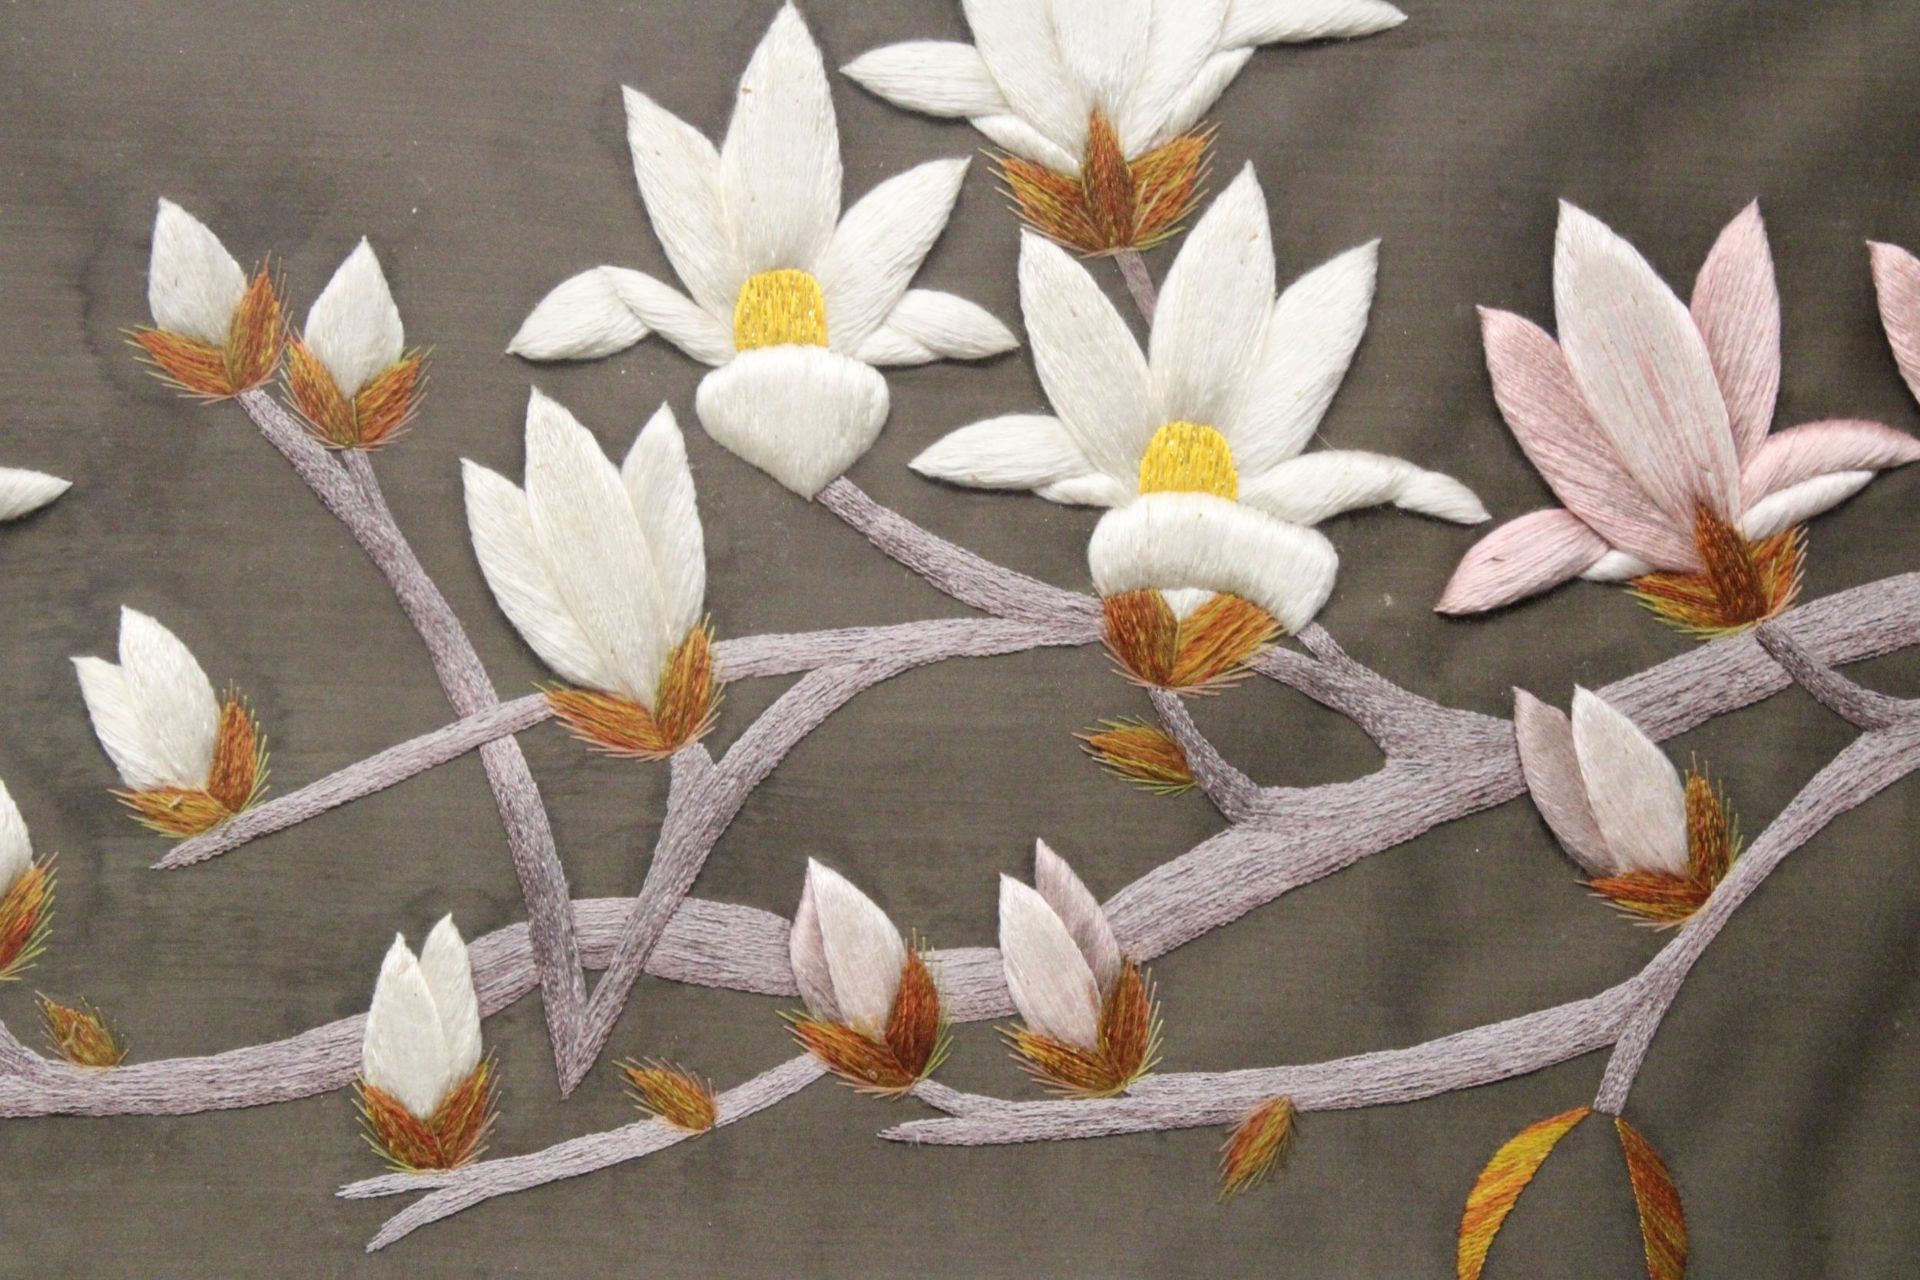 A 3D EFFECT, EMBROIDERED, FRAMED FLORAL PICTURE ON FABRIC - Image 2 of 3